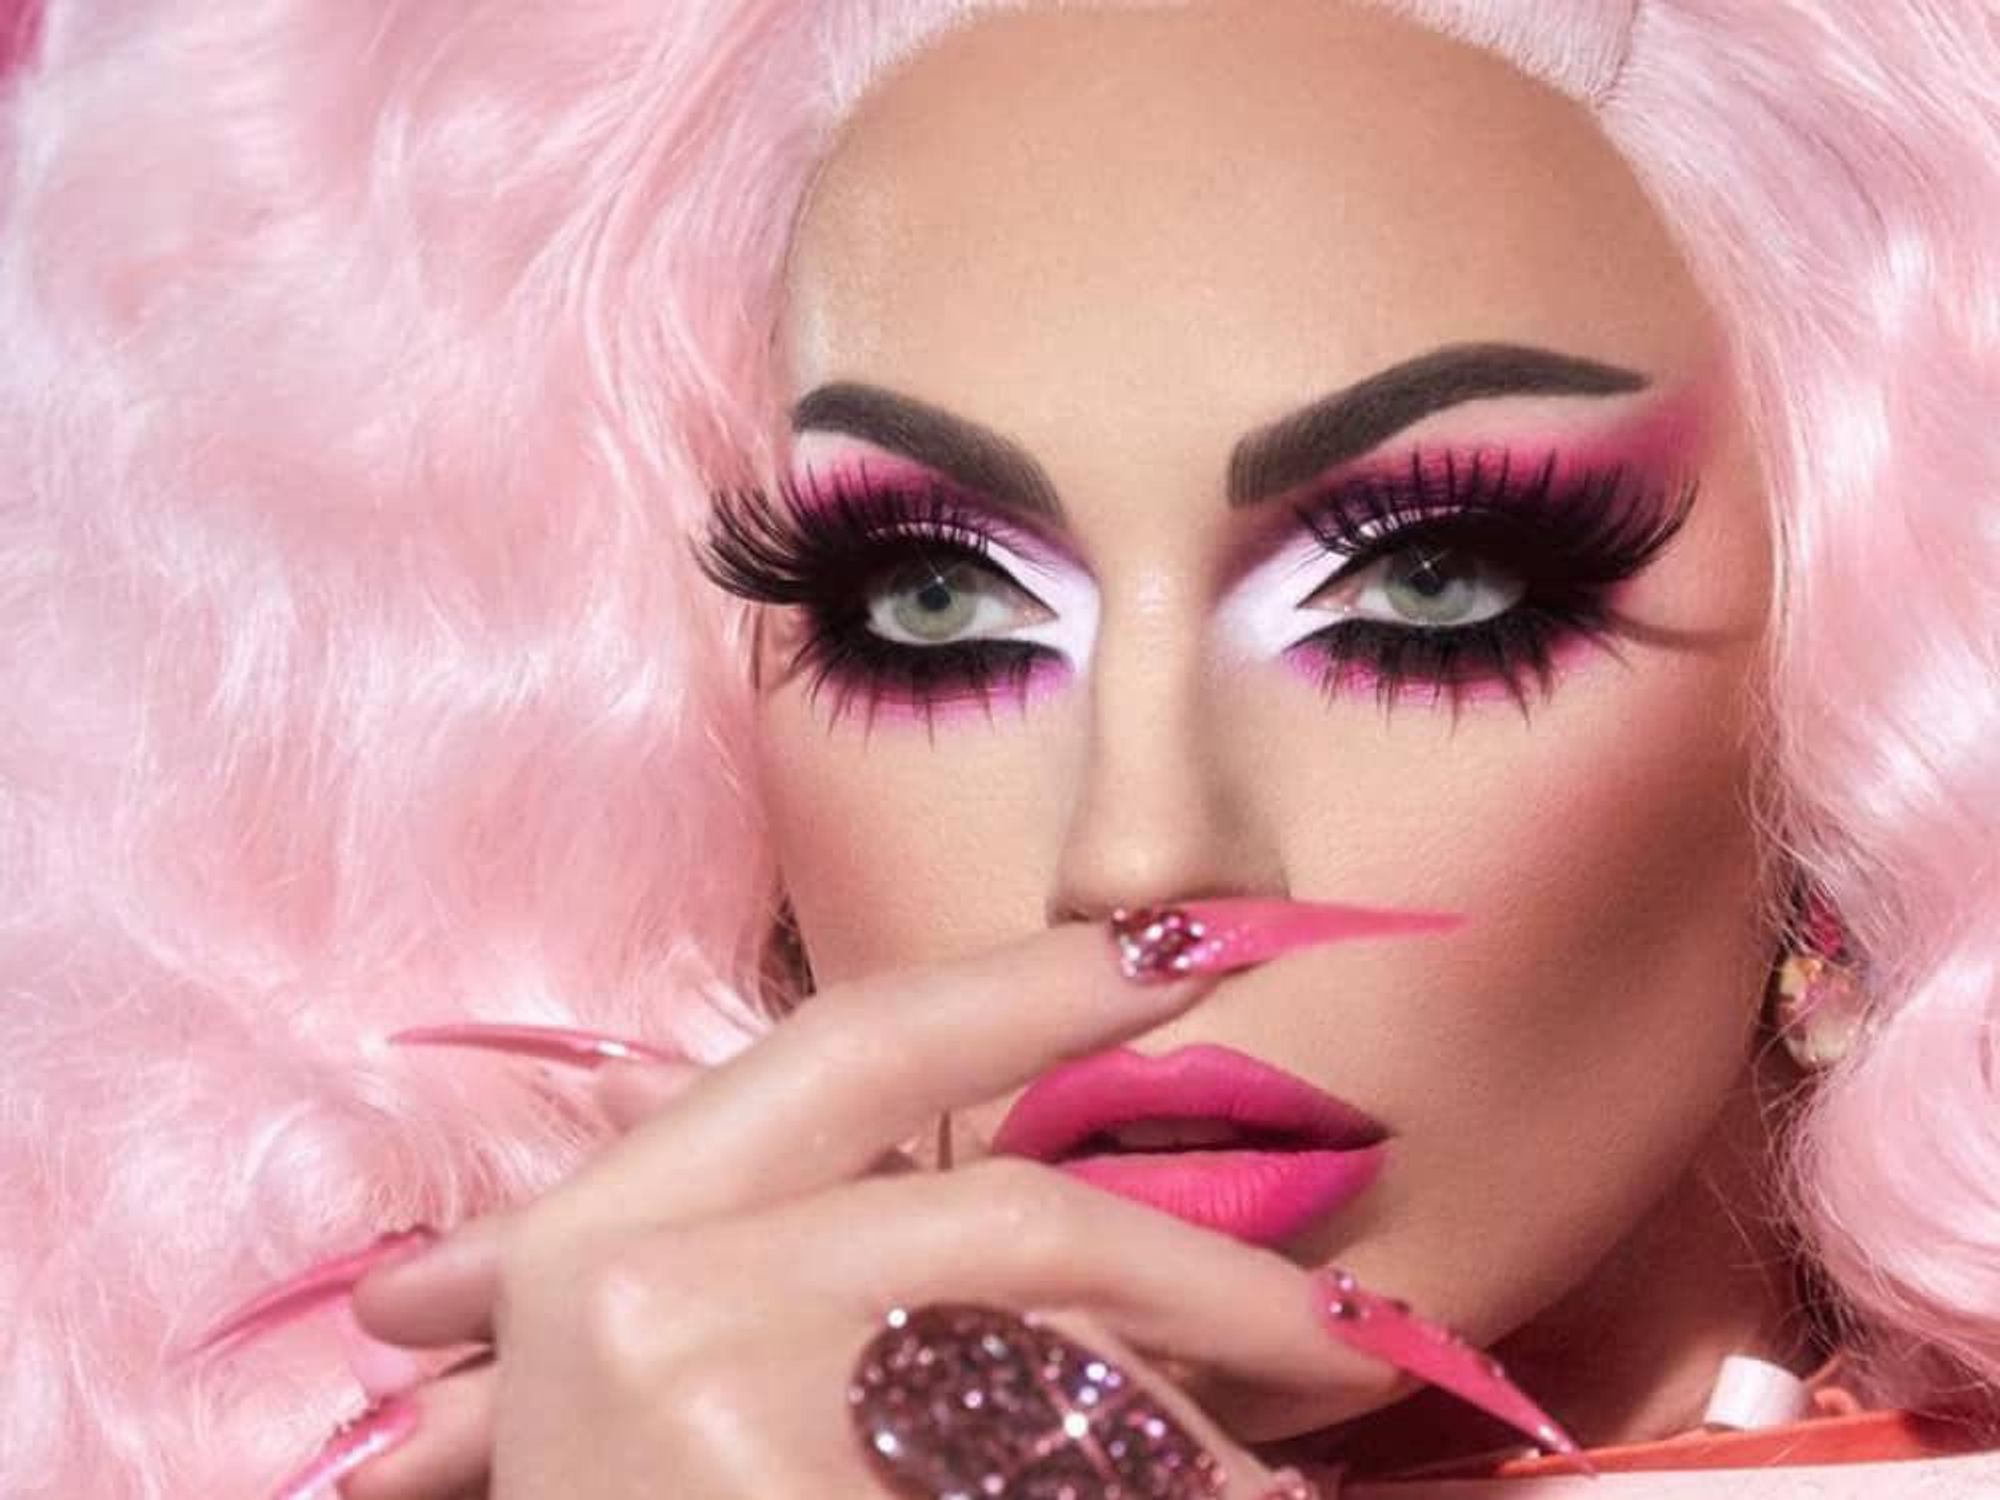 Superstar entertainer and Texan Alyssa Edwards stops at Aztec Theatre for one night only.